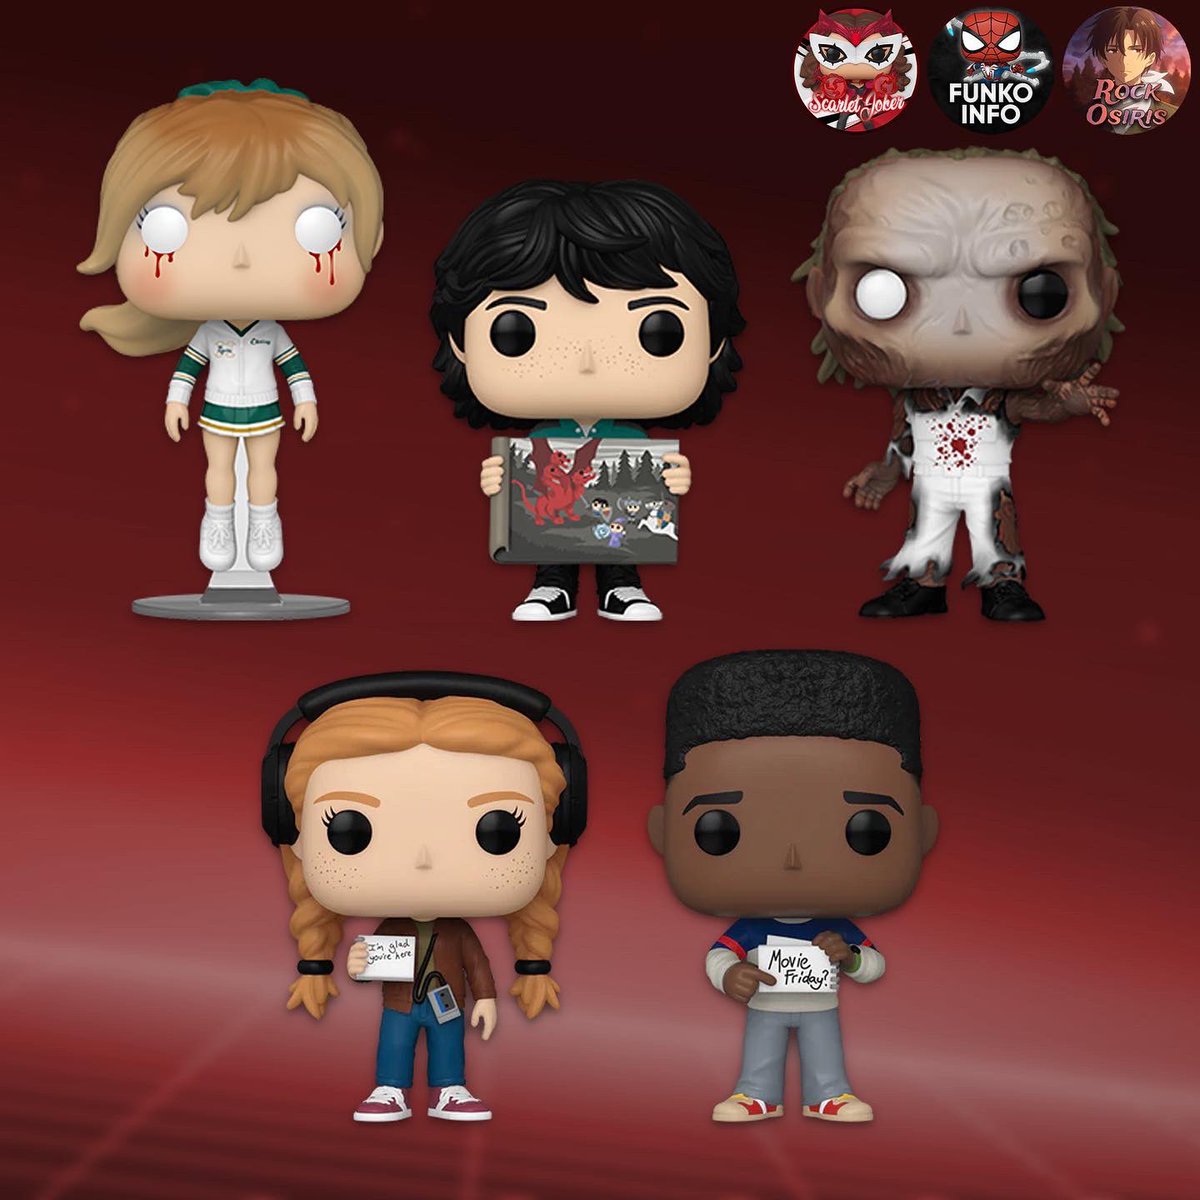 First look at the new Stranger Things Funko POPs! Dropping at the links below this week ~ thanks @funkoinfo_ ~
EE ~ fnkpp.com/Drop
Amzn ~ fnkpp.com/Amzn
#Ad #StrangerThings #FPN #FunkoPOPNews #Funko #POP #POPVinyl #FunkoPOP #FunkoSoda